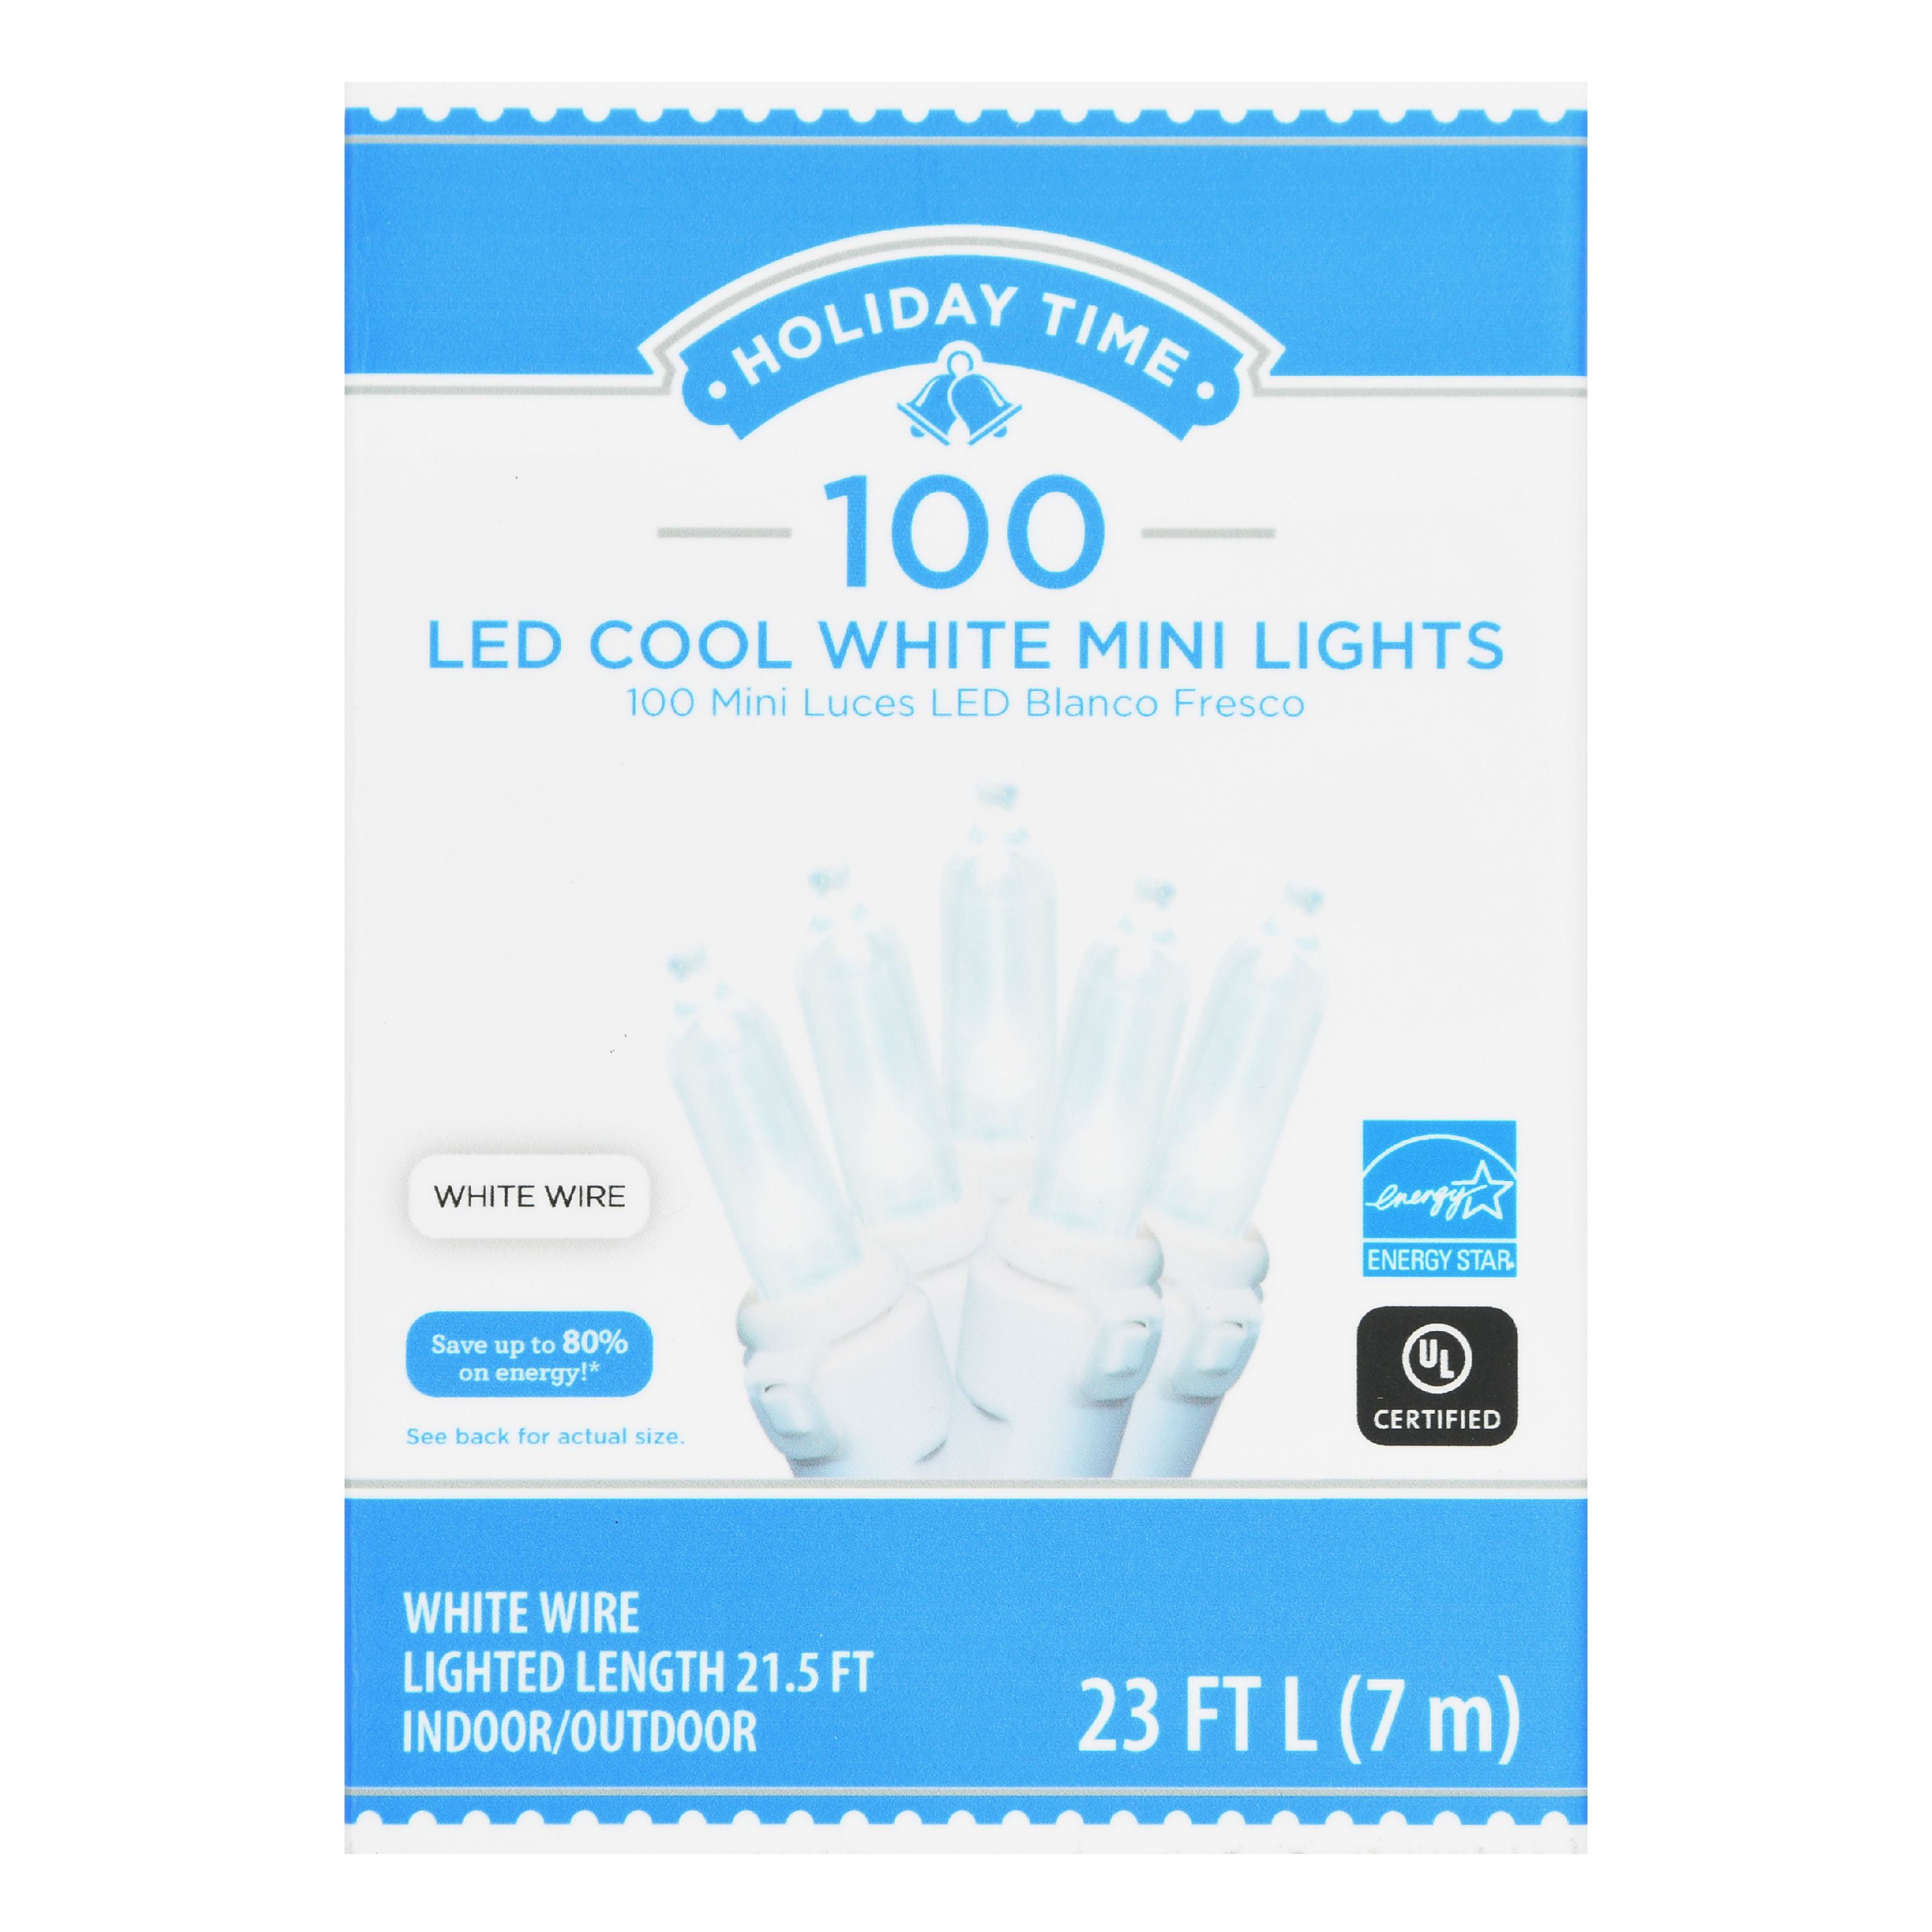 Lot of 12 Holiday Time 50 LED COOL WHITE Mini Lights  *WHITE WIRE*  Wedding NEW 